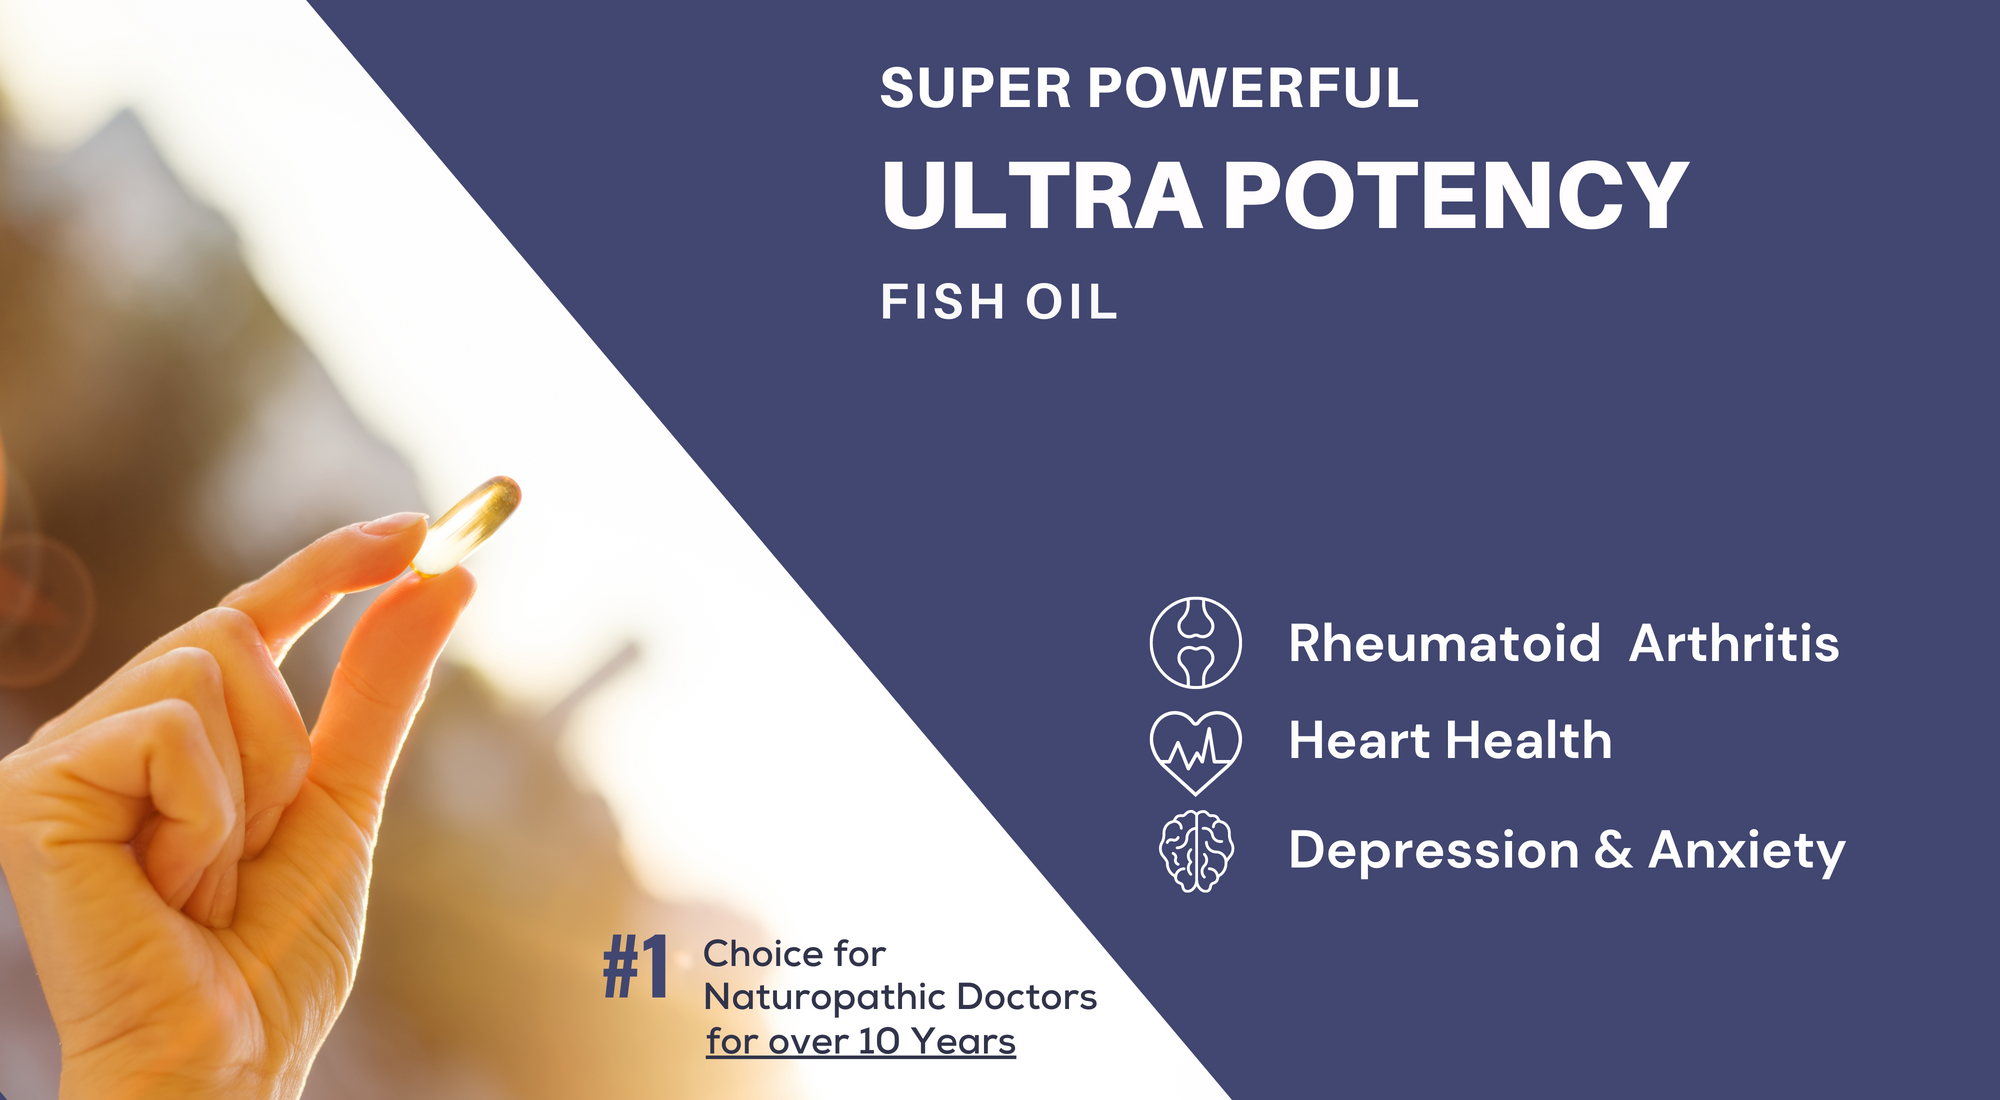 What is Supercritical Omega 3 Fish oil?